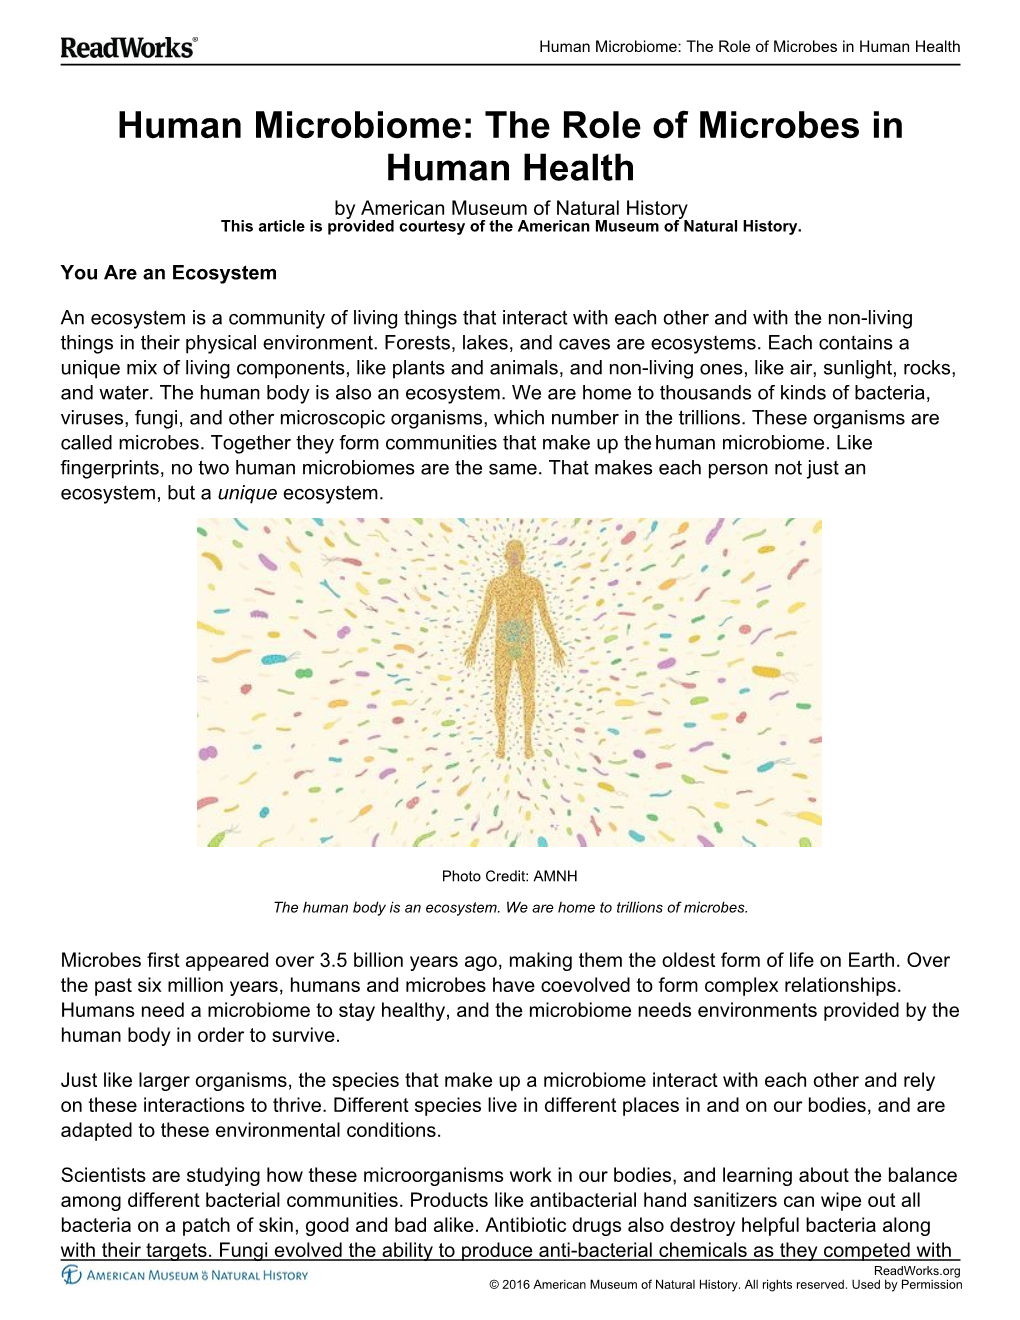 Human Microbiome: the Role of Microbes in Human Health